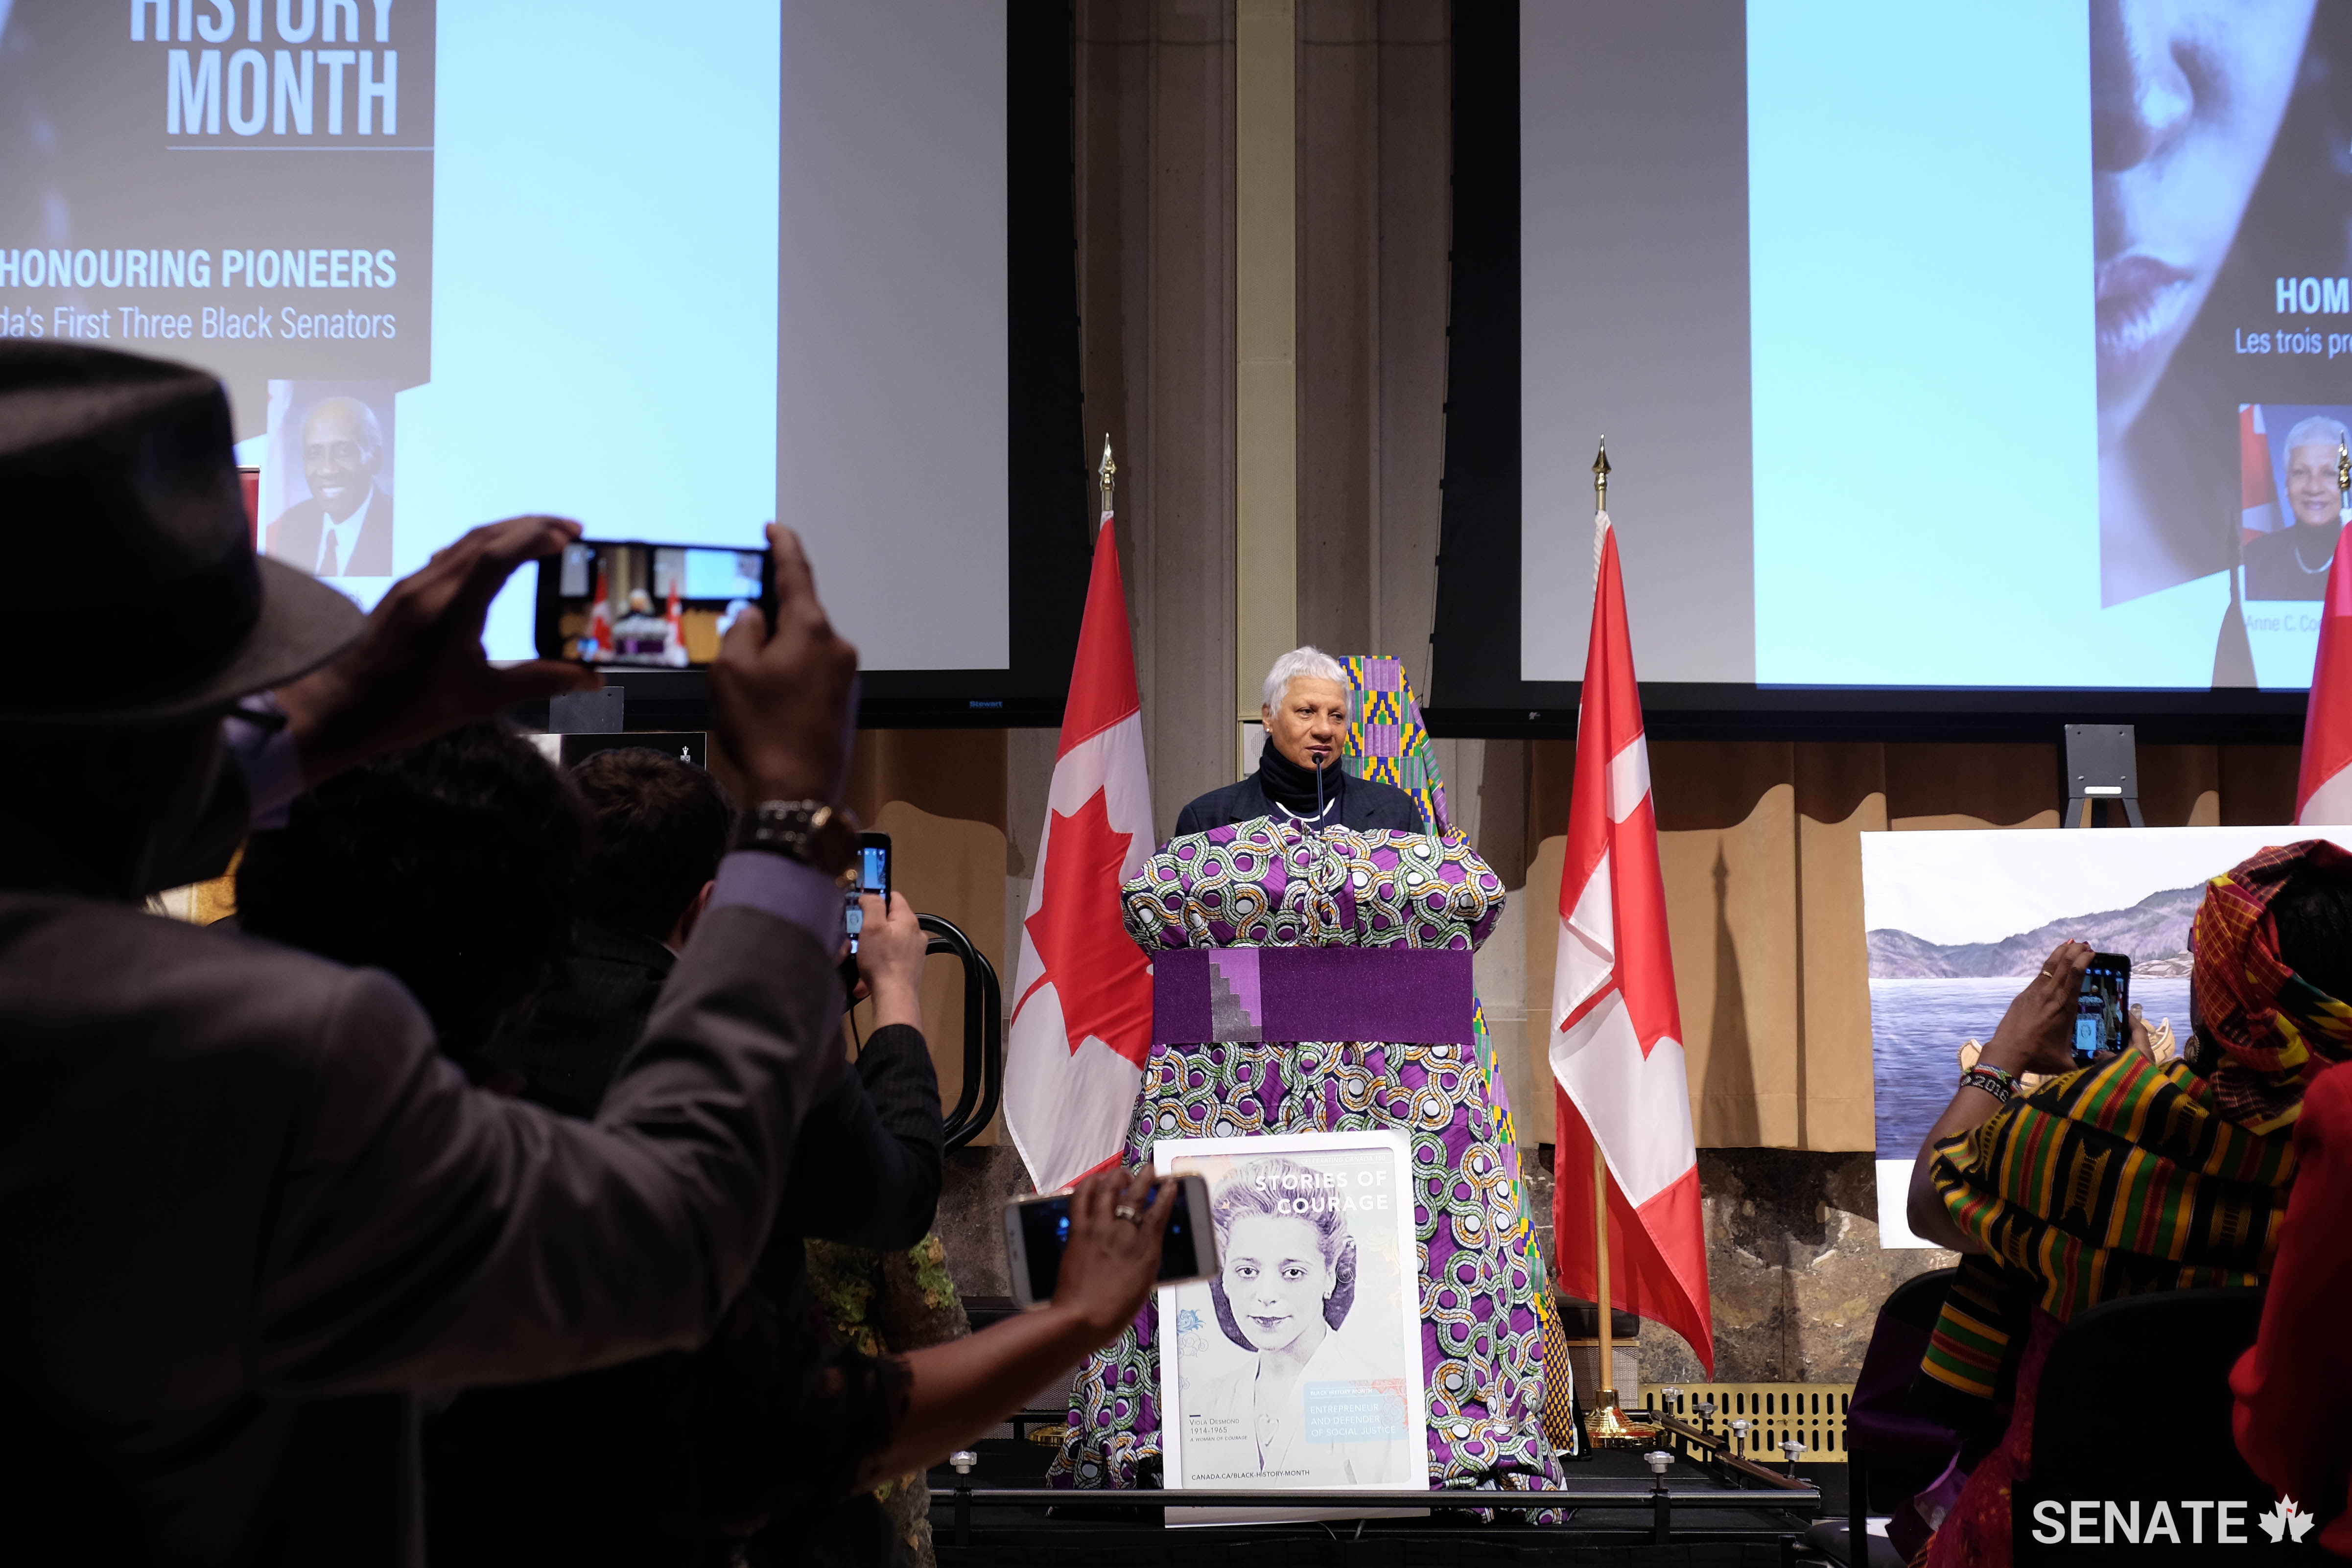 Senator Anne C. Cools, guest speaker at the Senate’s Black History Month event, talks about her roots in the British West Indies, the bravery of those who led the movement to abolish slavery and the place of Canada in this narrative.